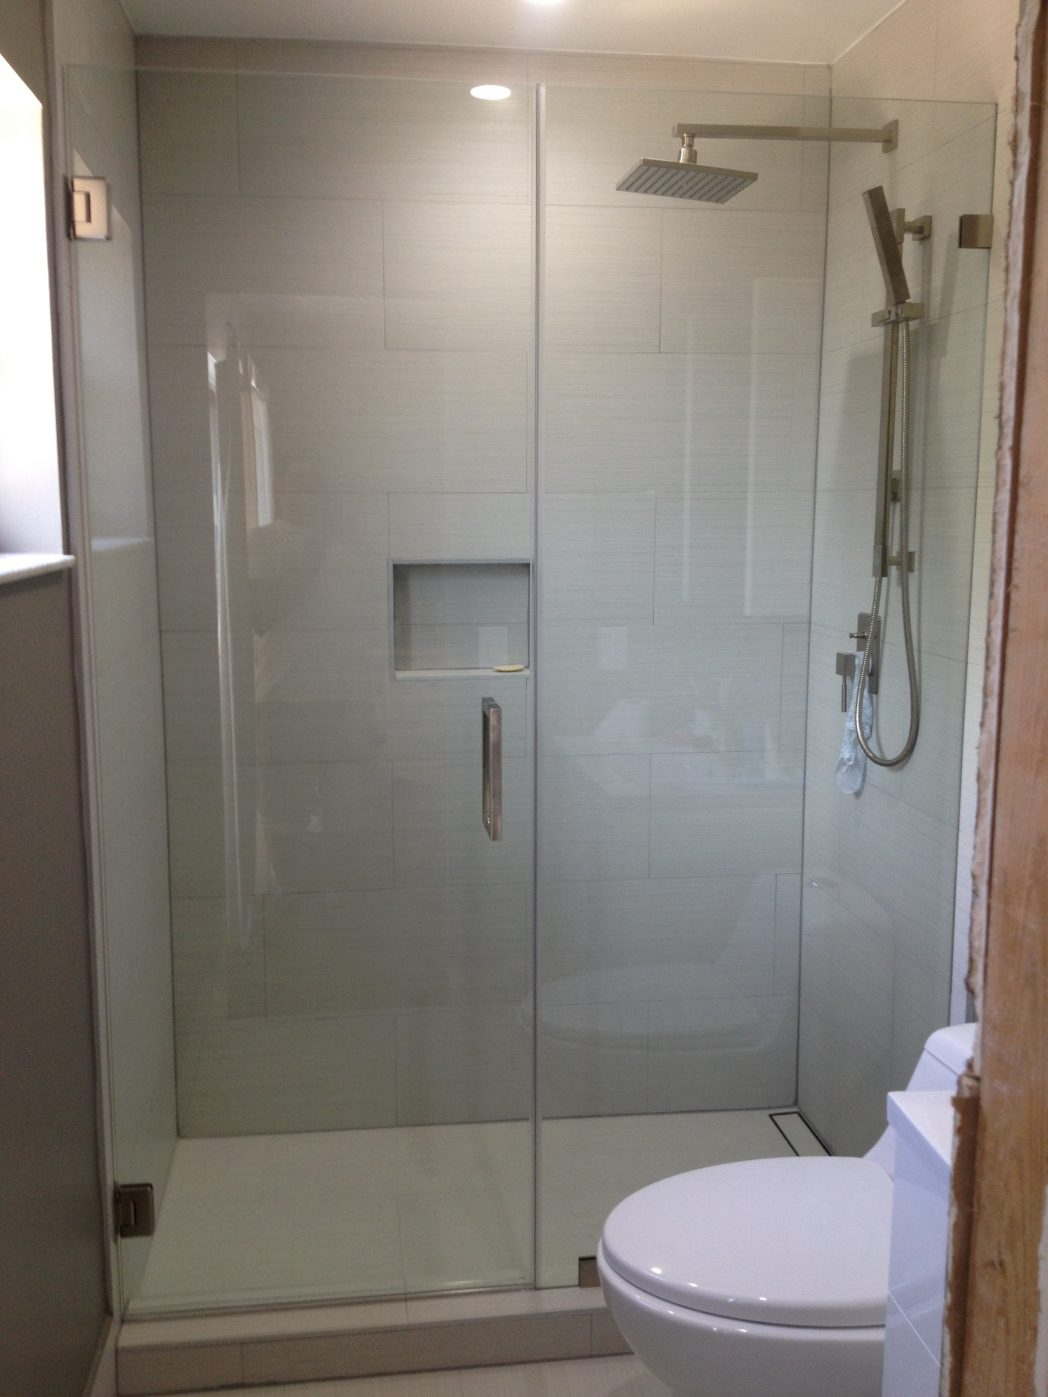 Sofa Custom Frameless Shower Doors Cw Oasis Pricesglass 97 Intended with proportions 1048 X 1397